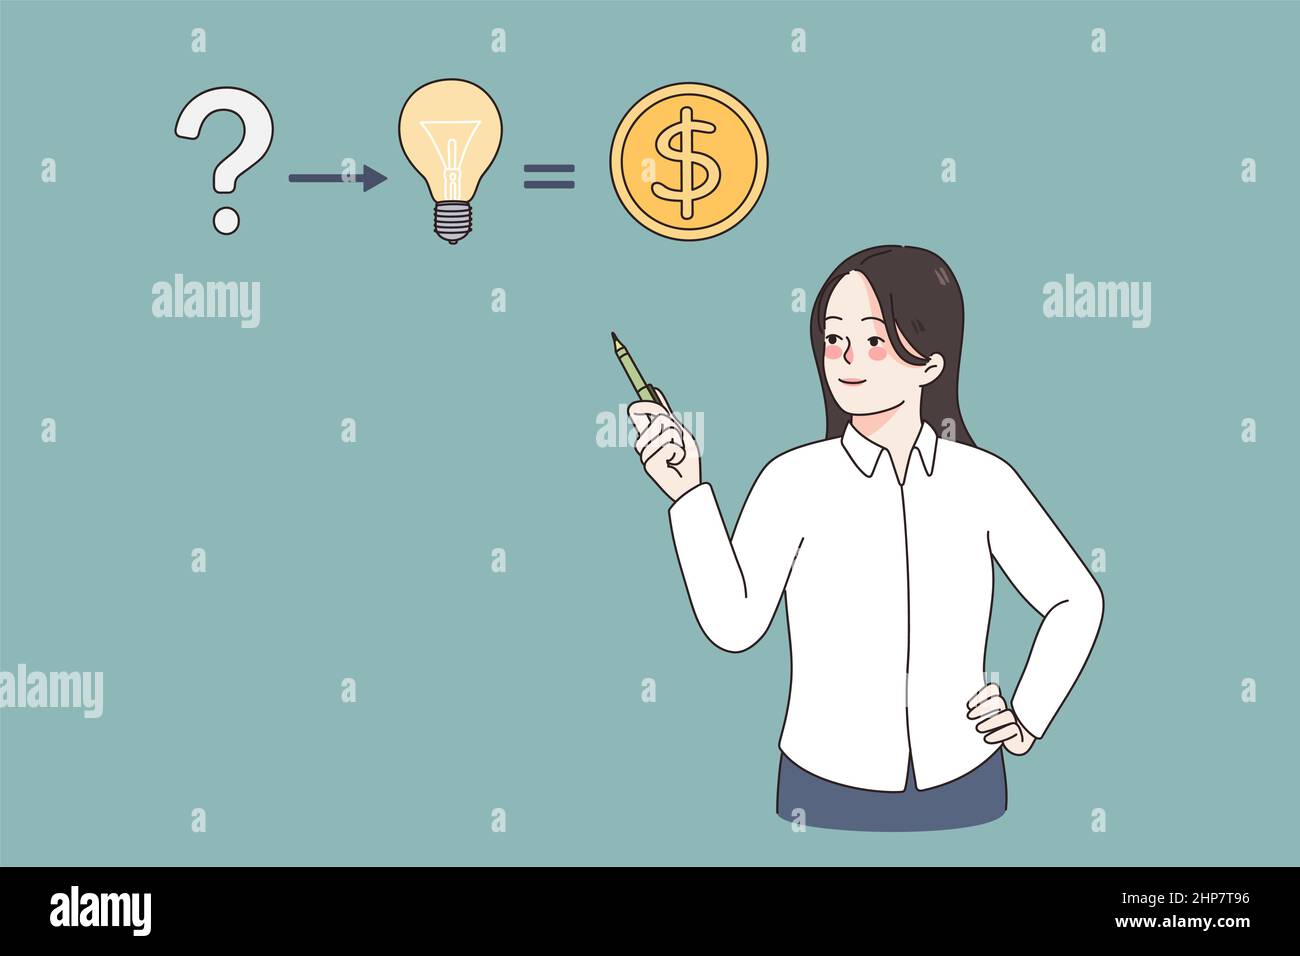 From question to making money concept. Stock Vector